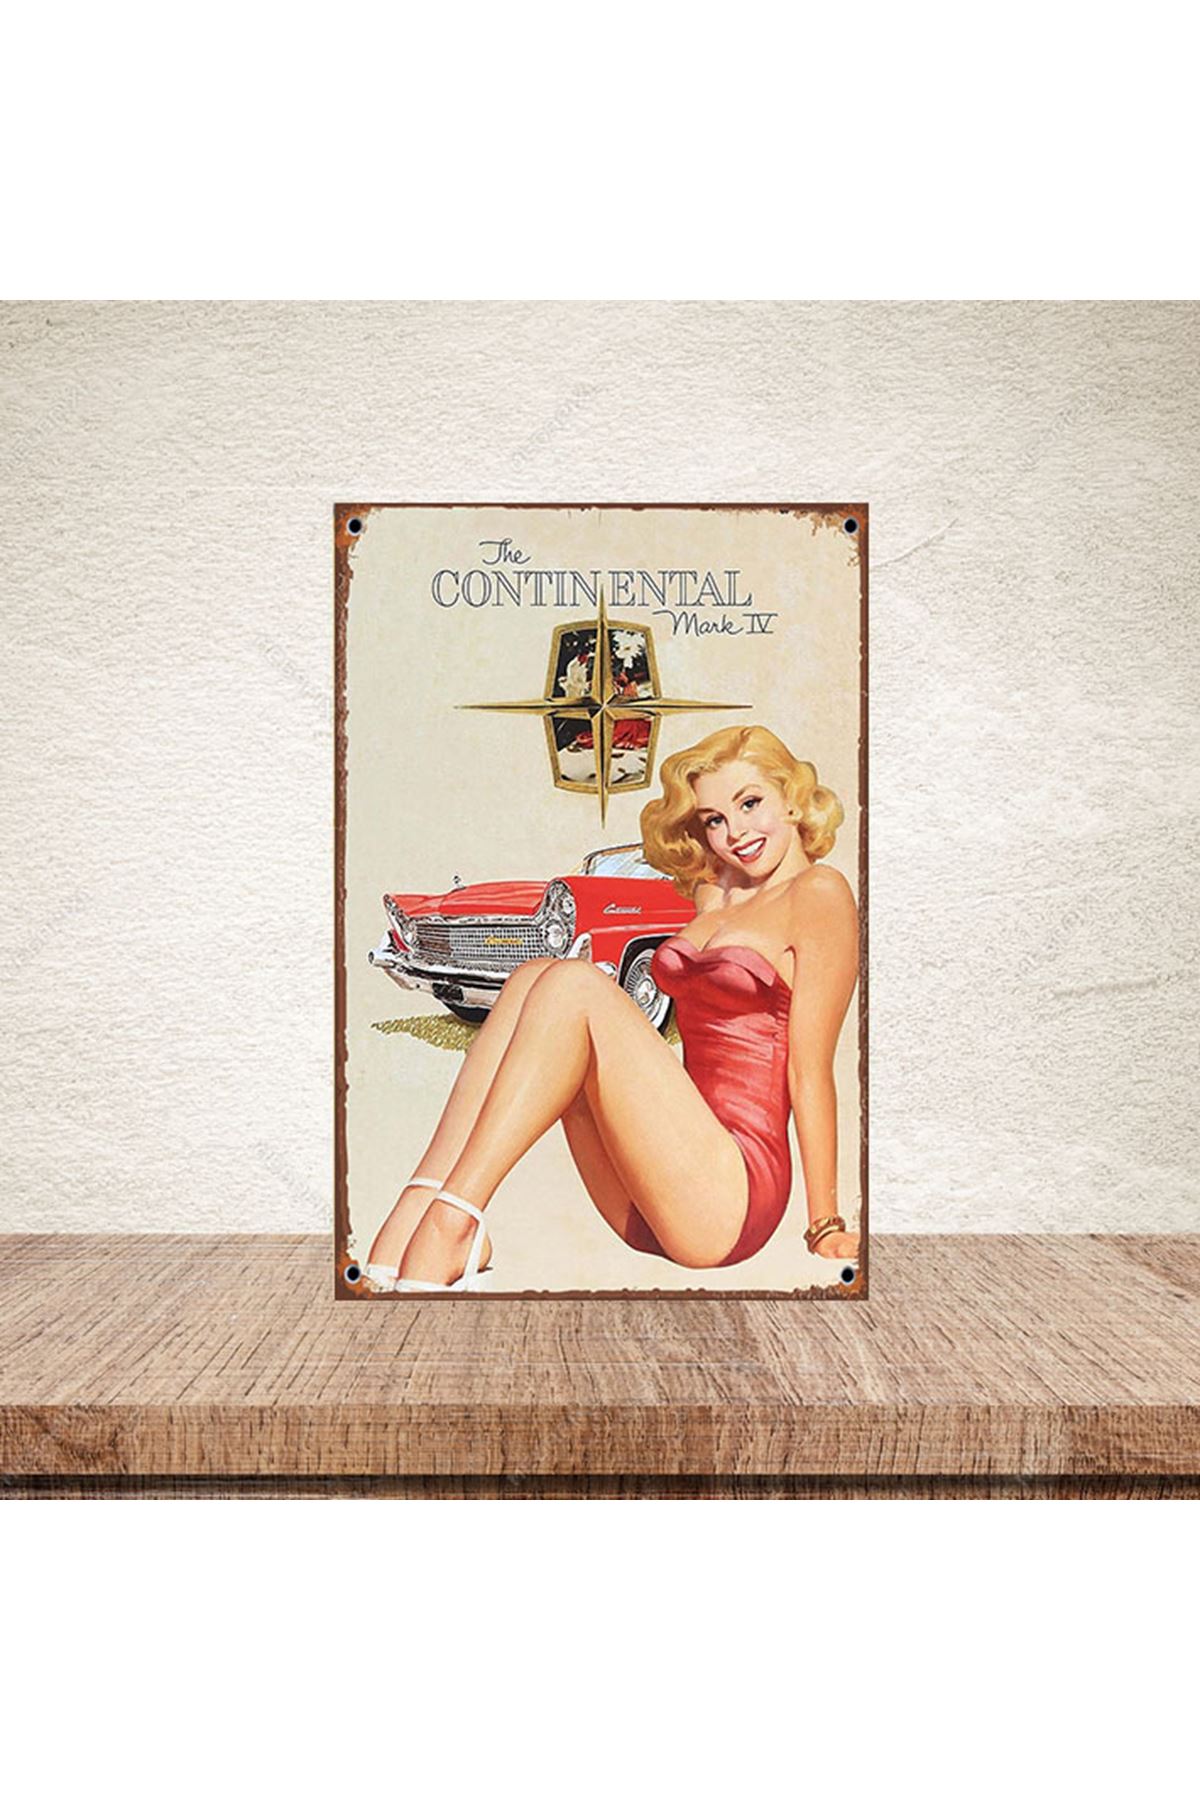 THE CONTİNENTAL MARK IV - AHŞAP POSTER